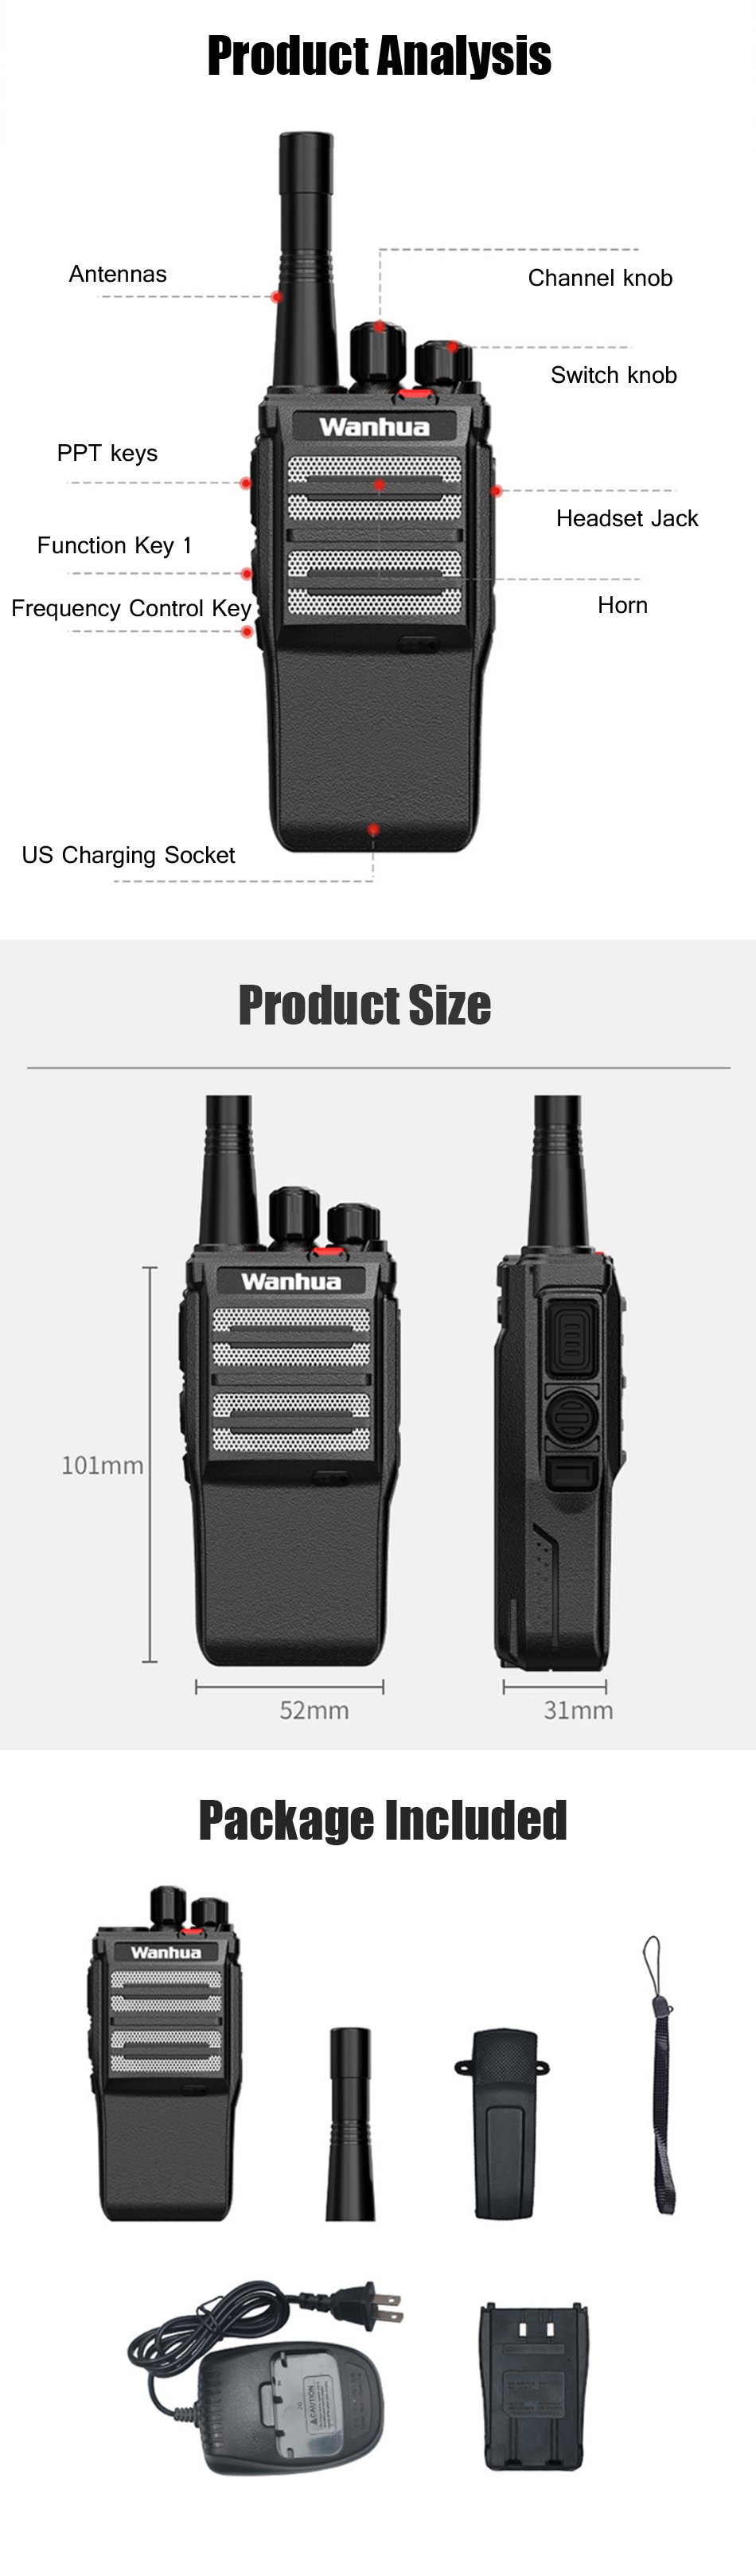 WANHUA-8W-Classic-Walkie-Talkie-16-Channels-400-470MHz-Two-Way-Handheld-Radio-Outdoor-Work-Durable-T-1771312-4